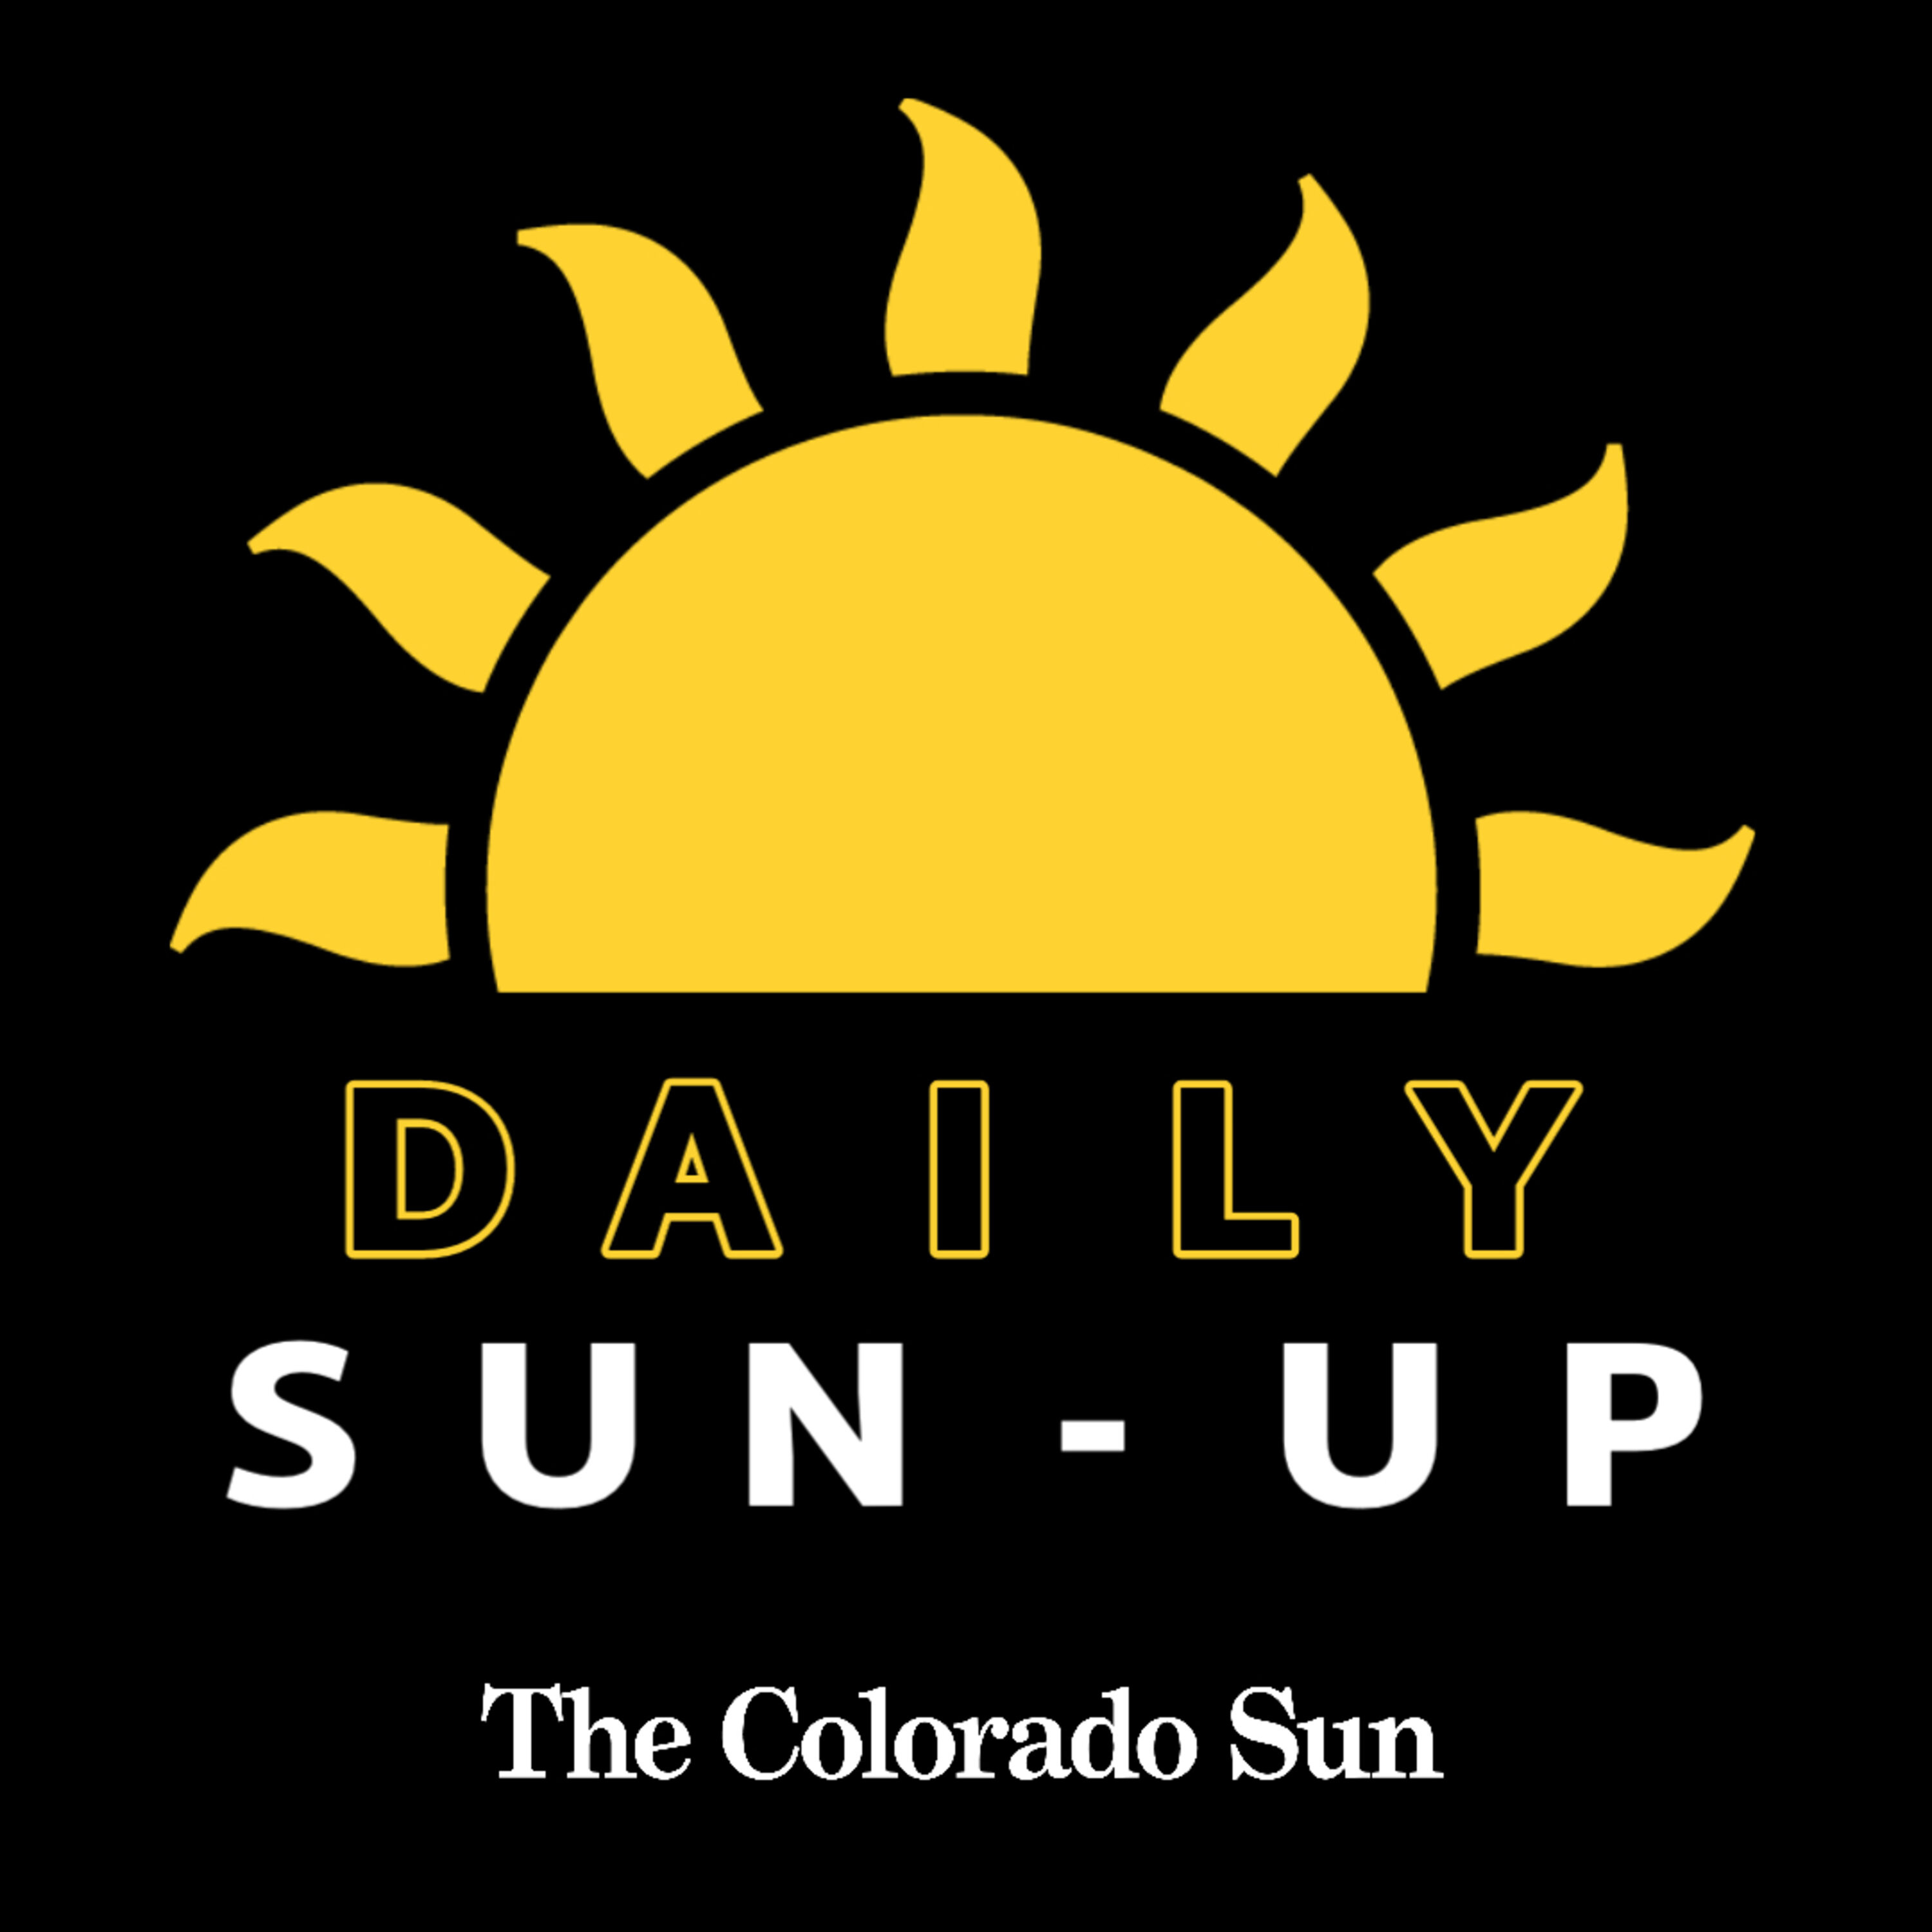 The Daily Sun-Up